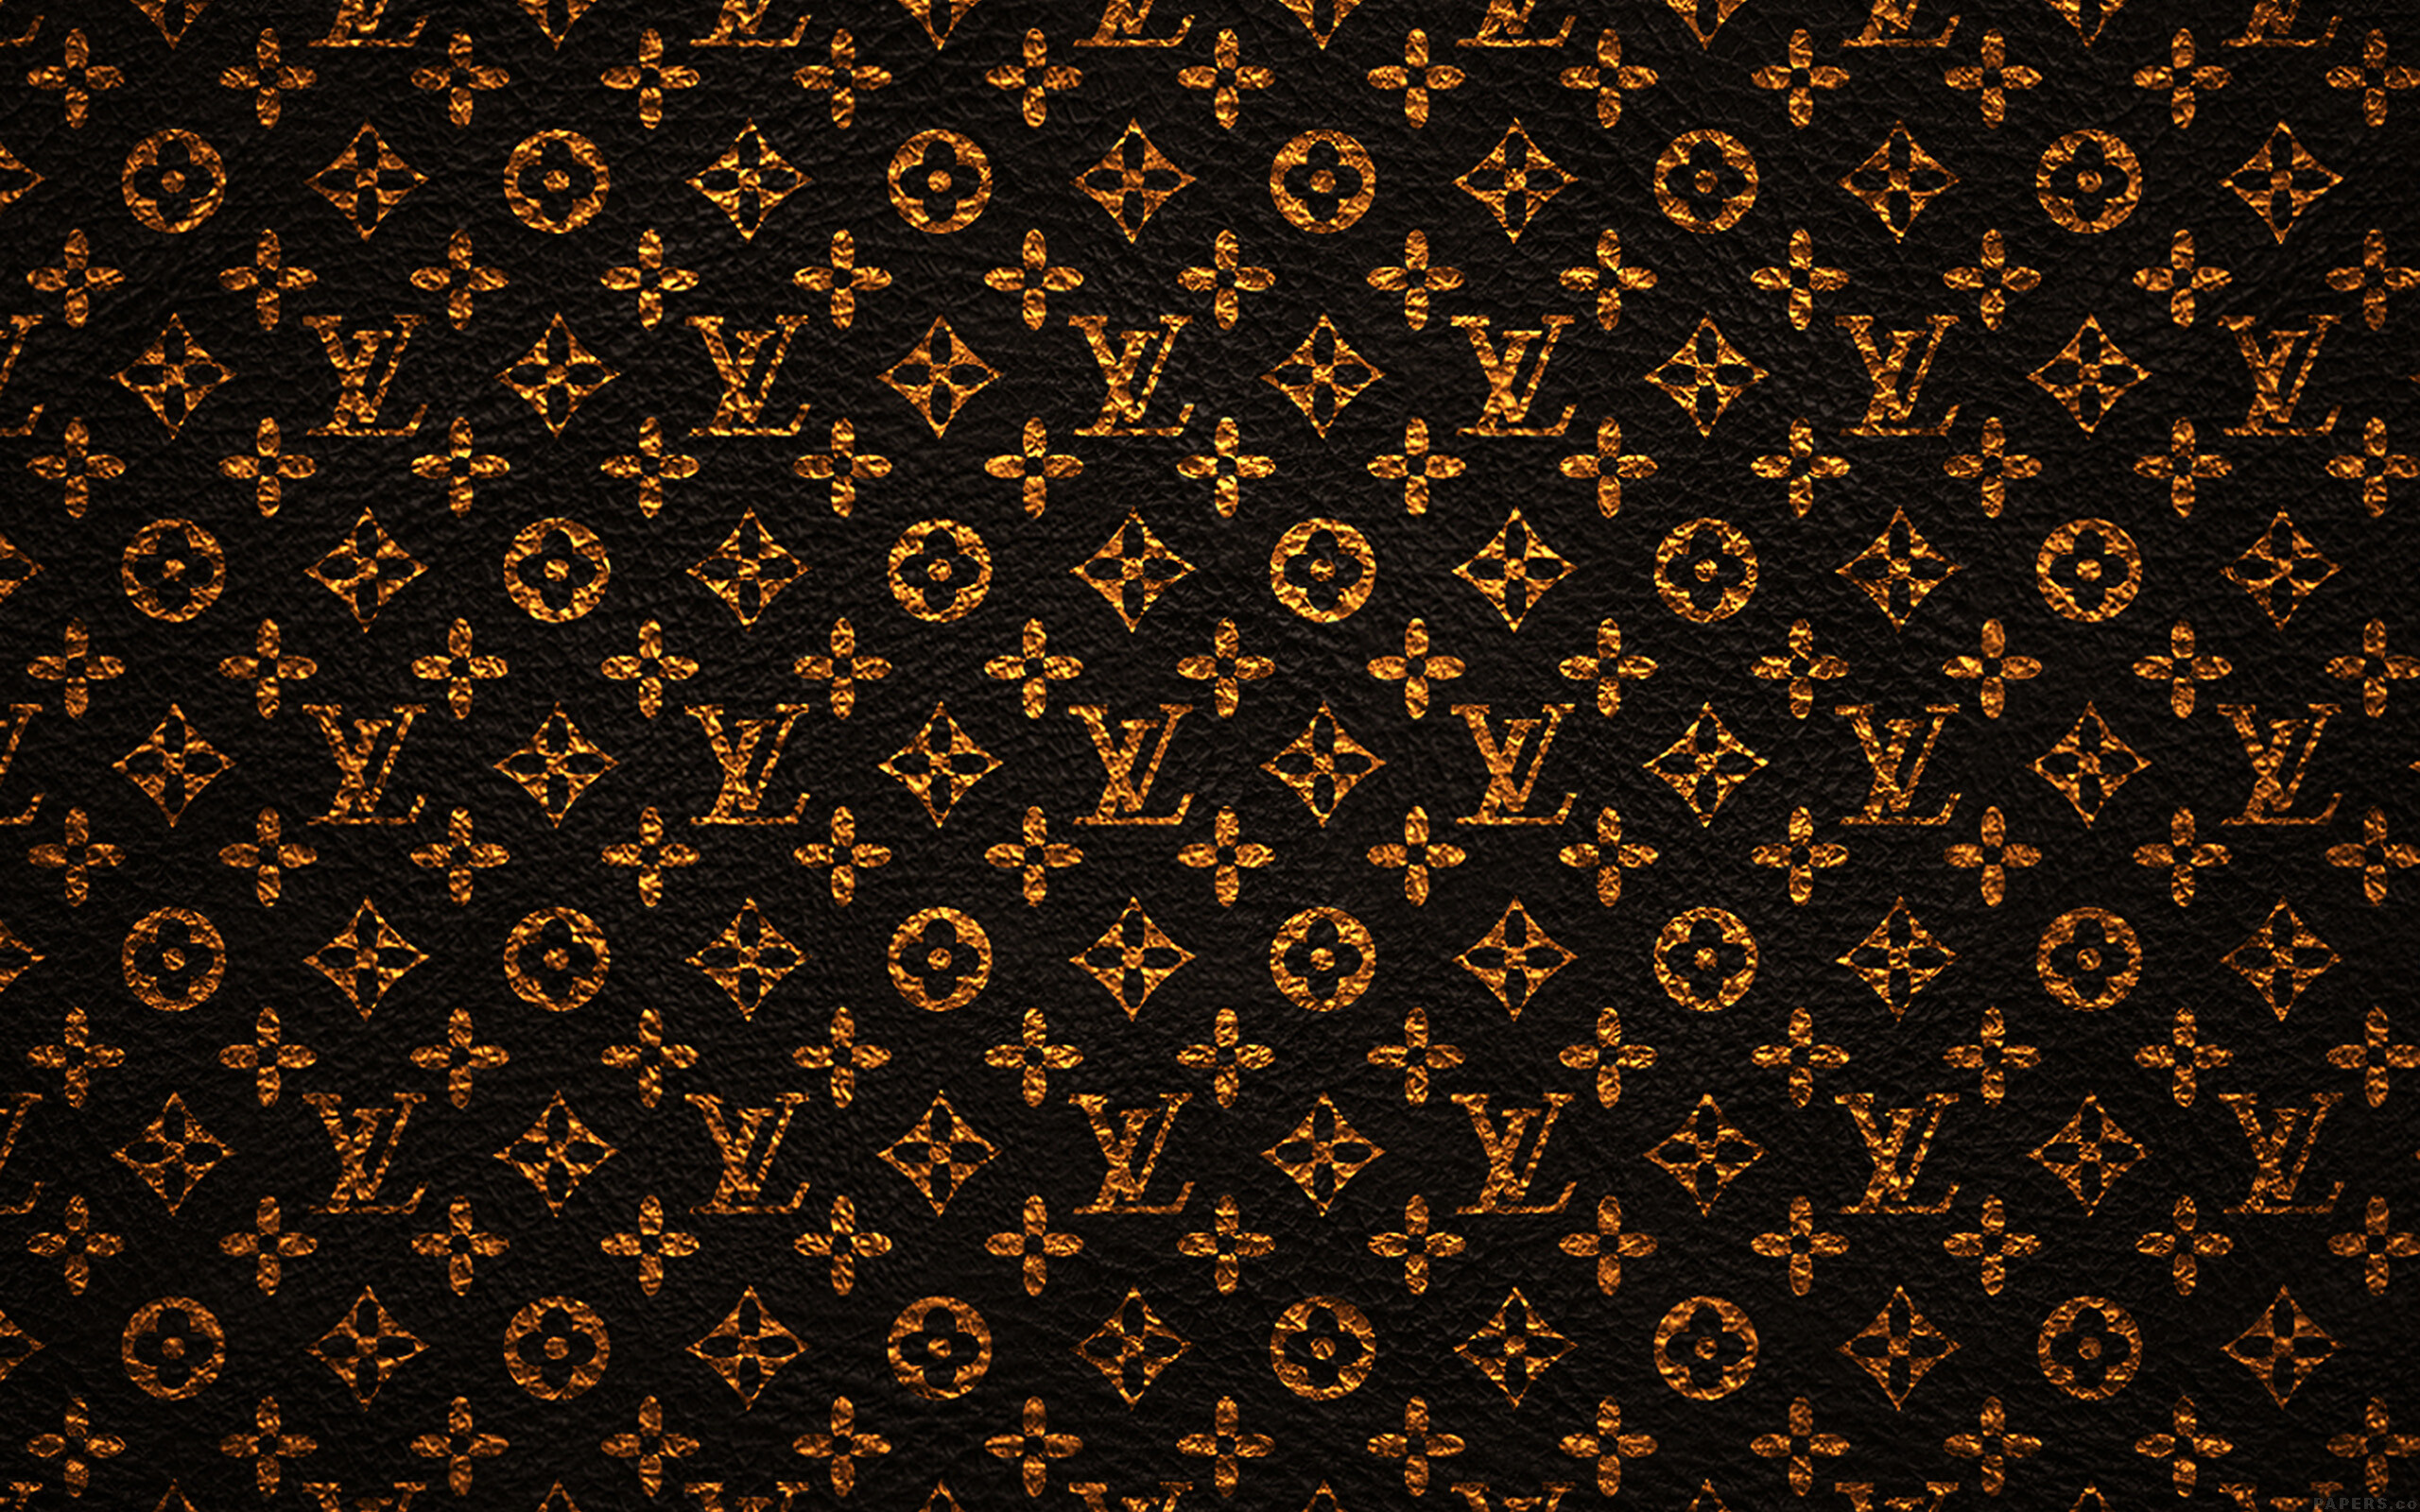 Louis Vuitton: Fashion brand known for its innovative designs and styles. 2560x1600 HD Background.